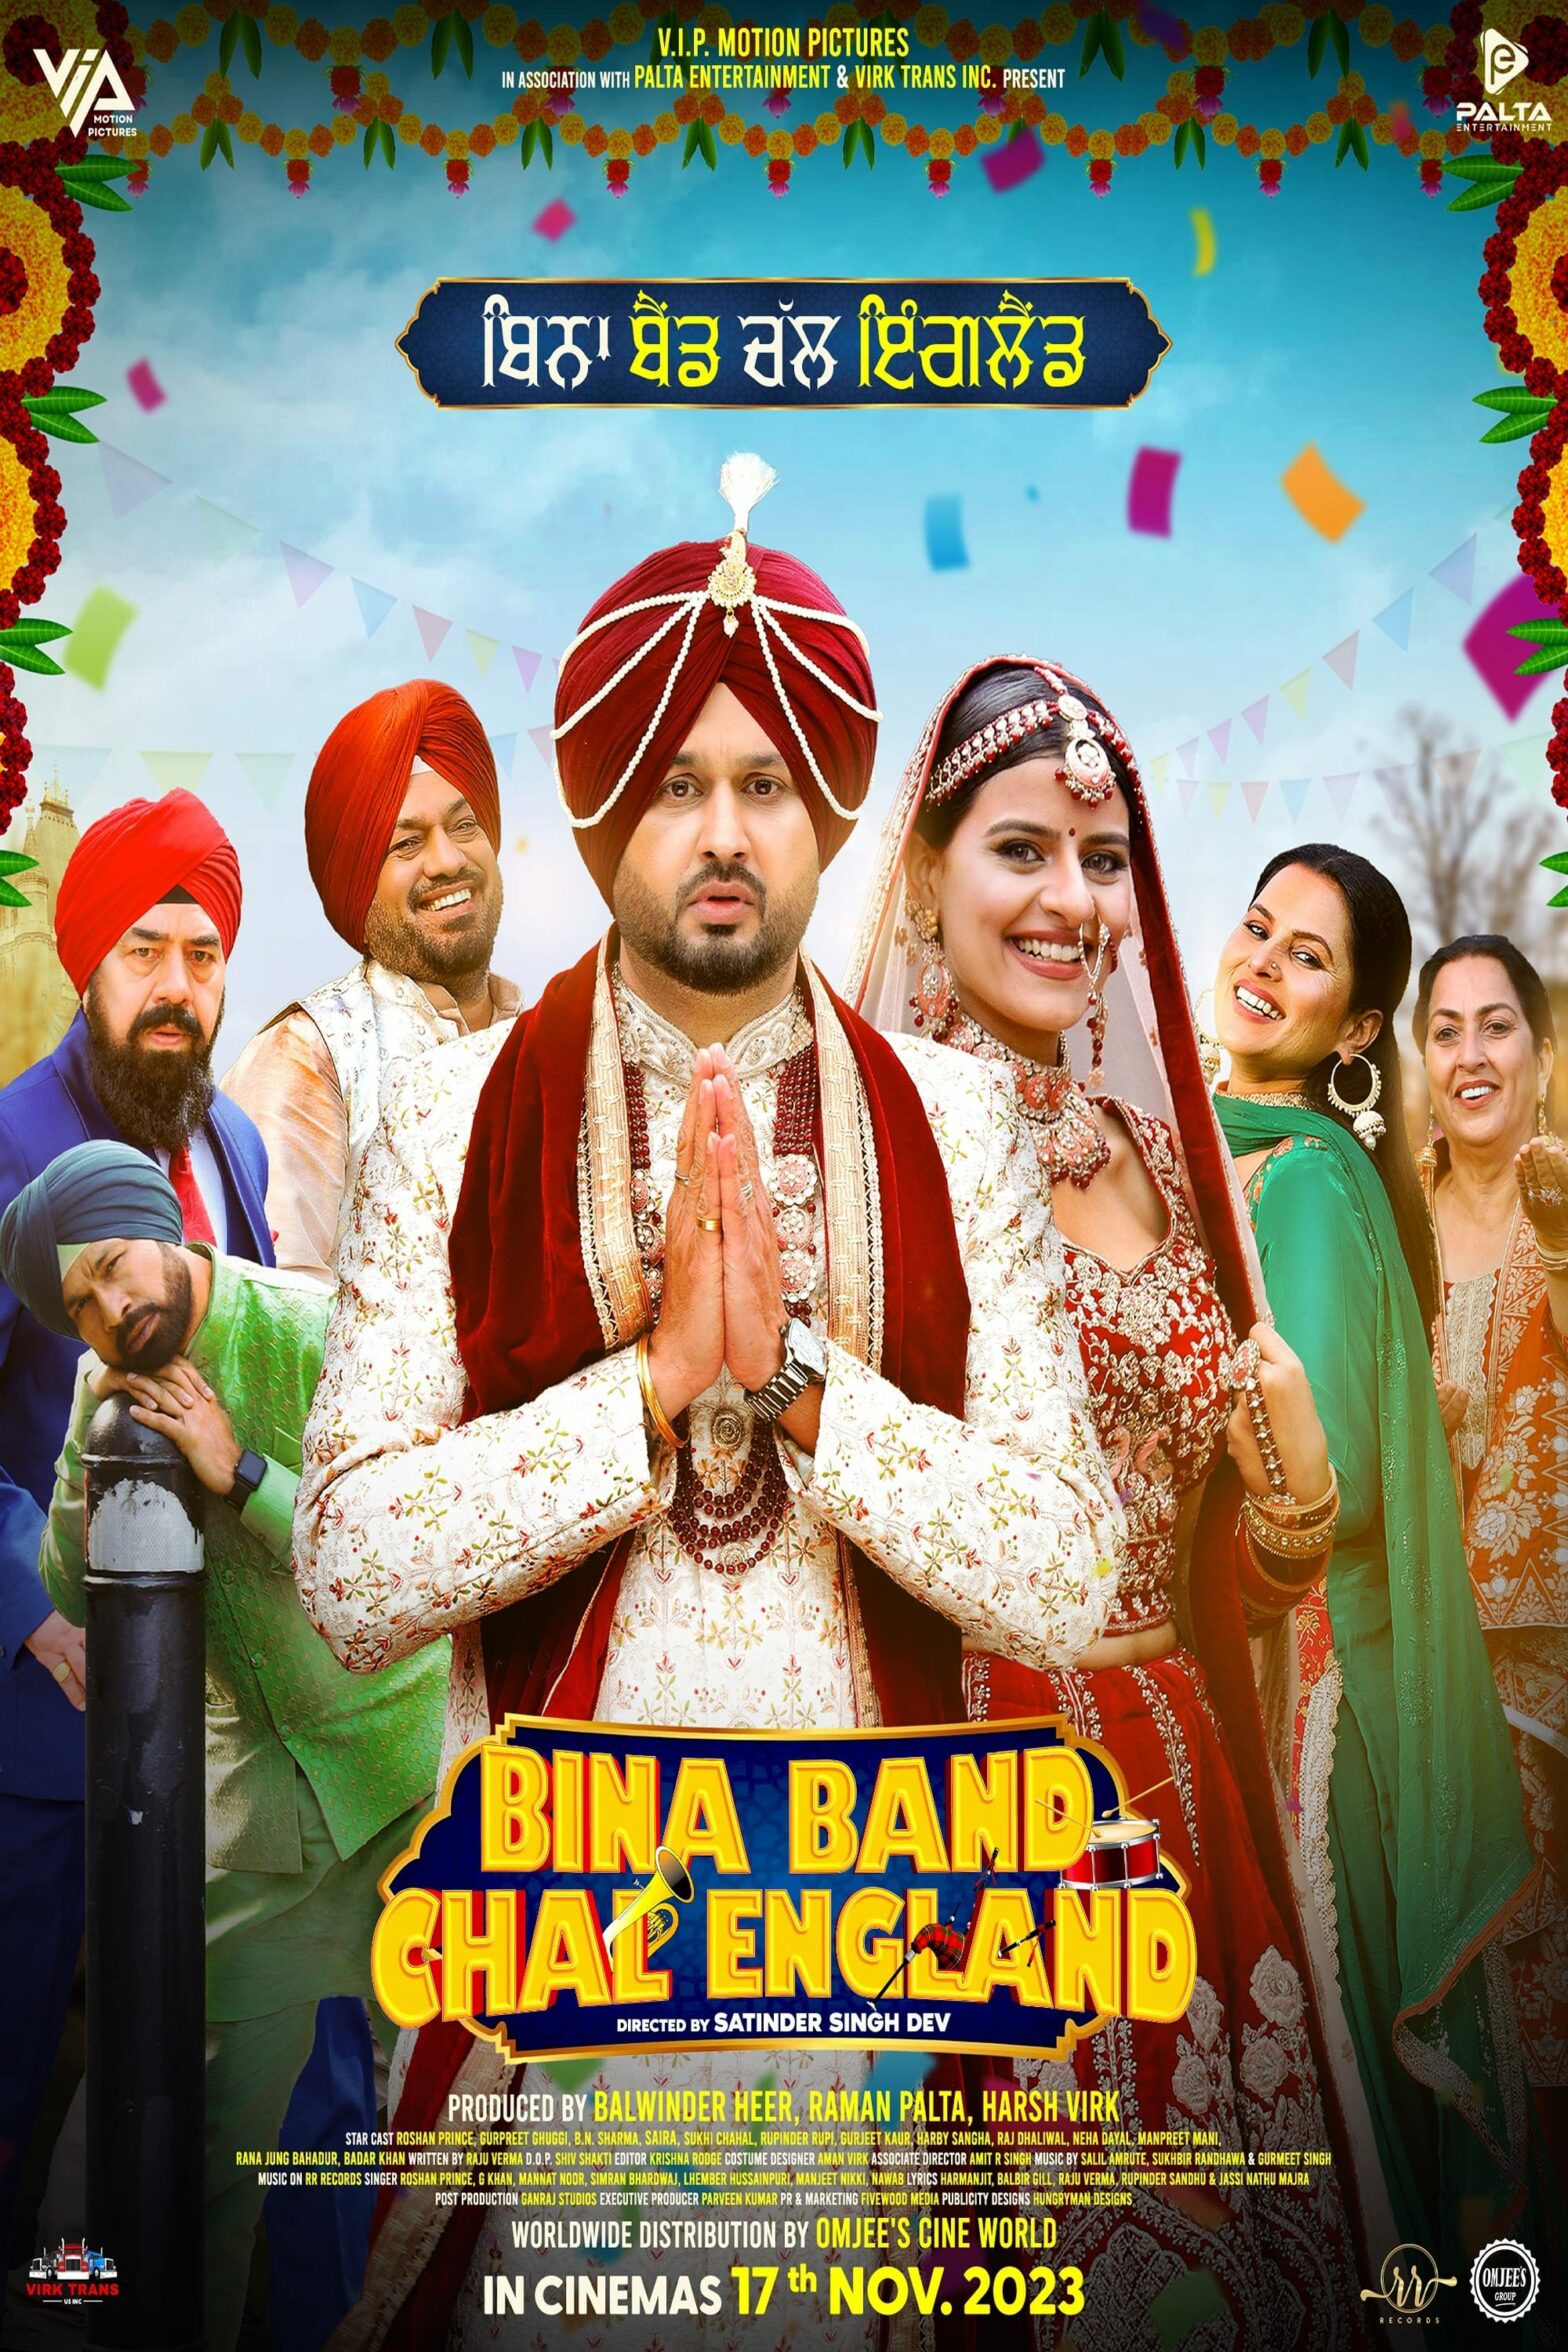 Poster for the movie "Bina Band Chal England"